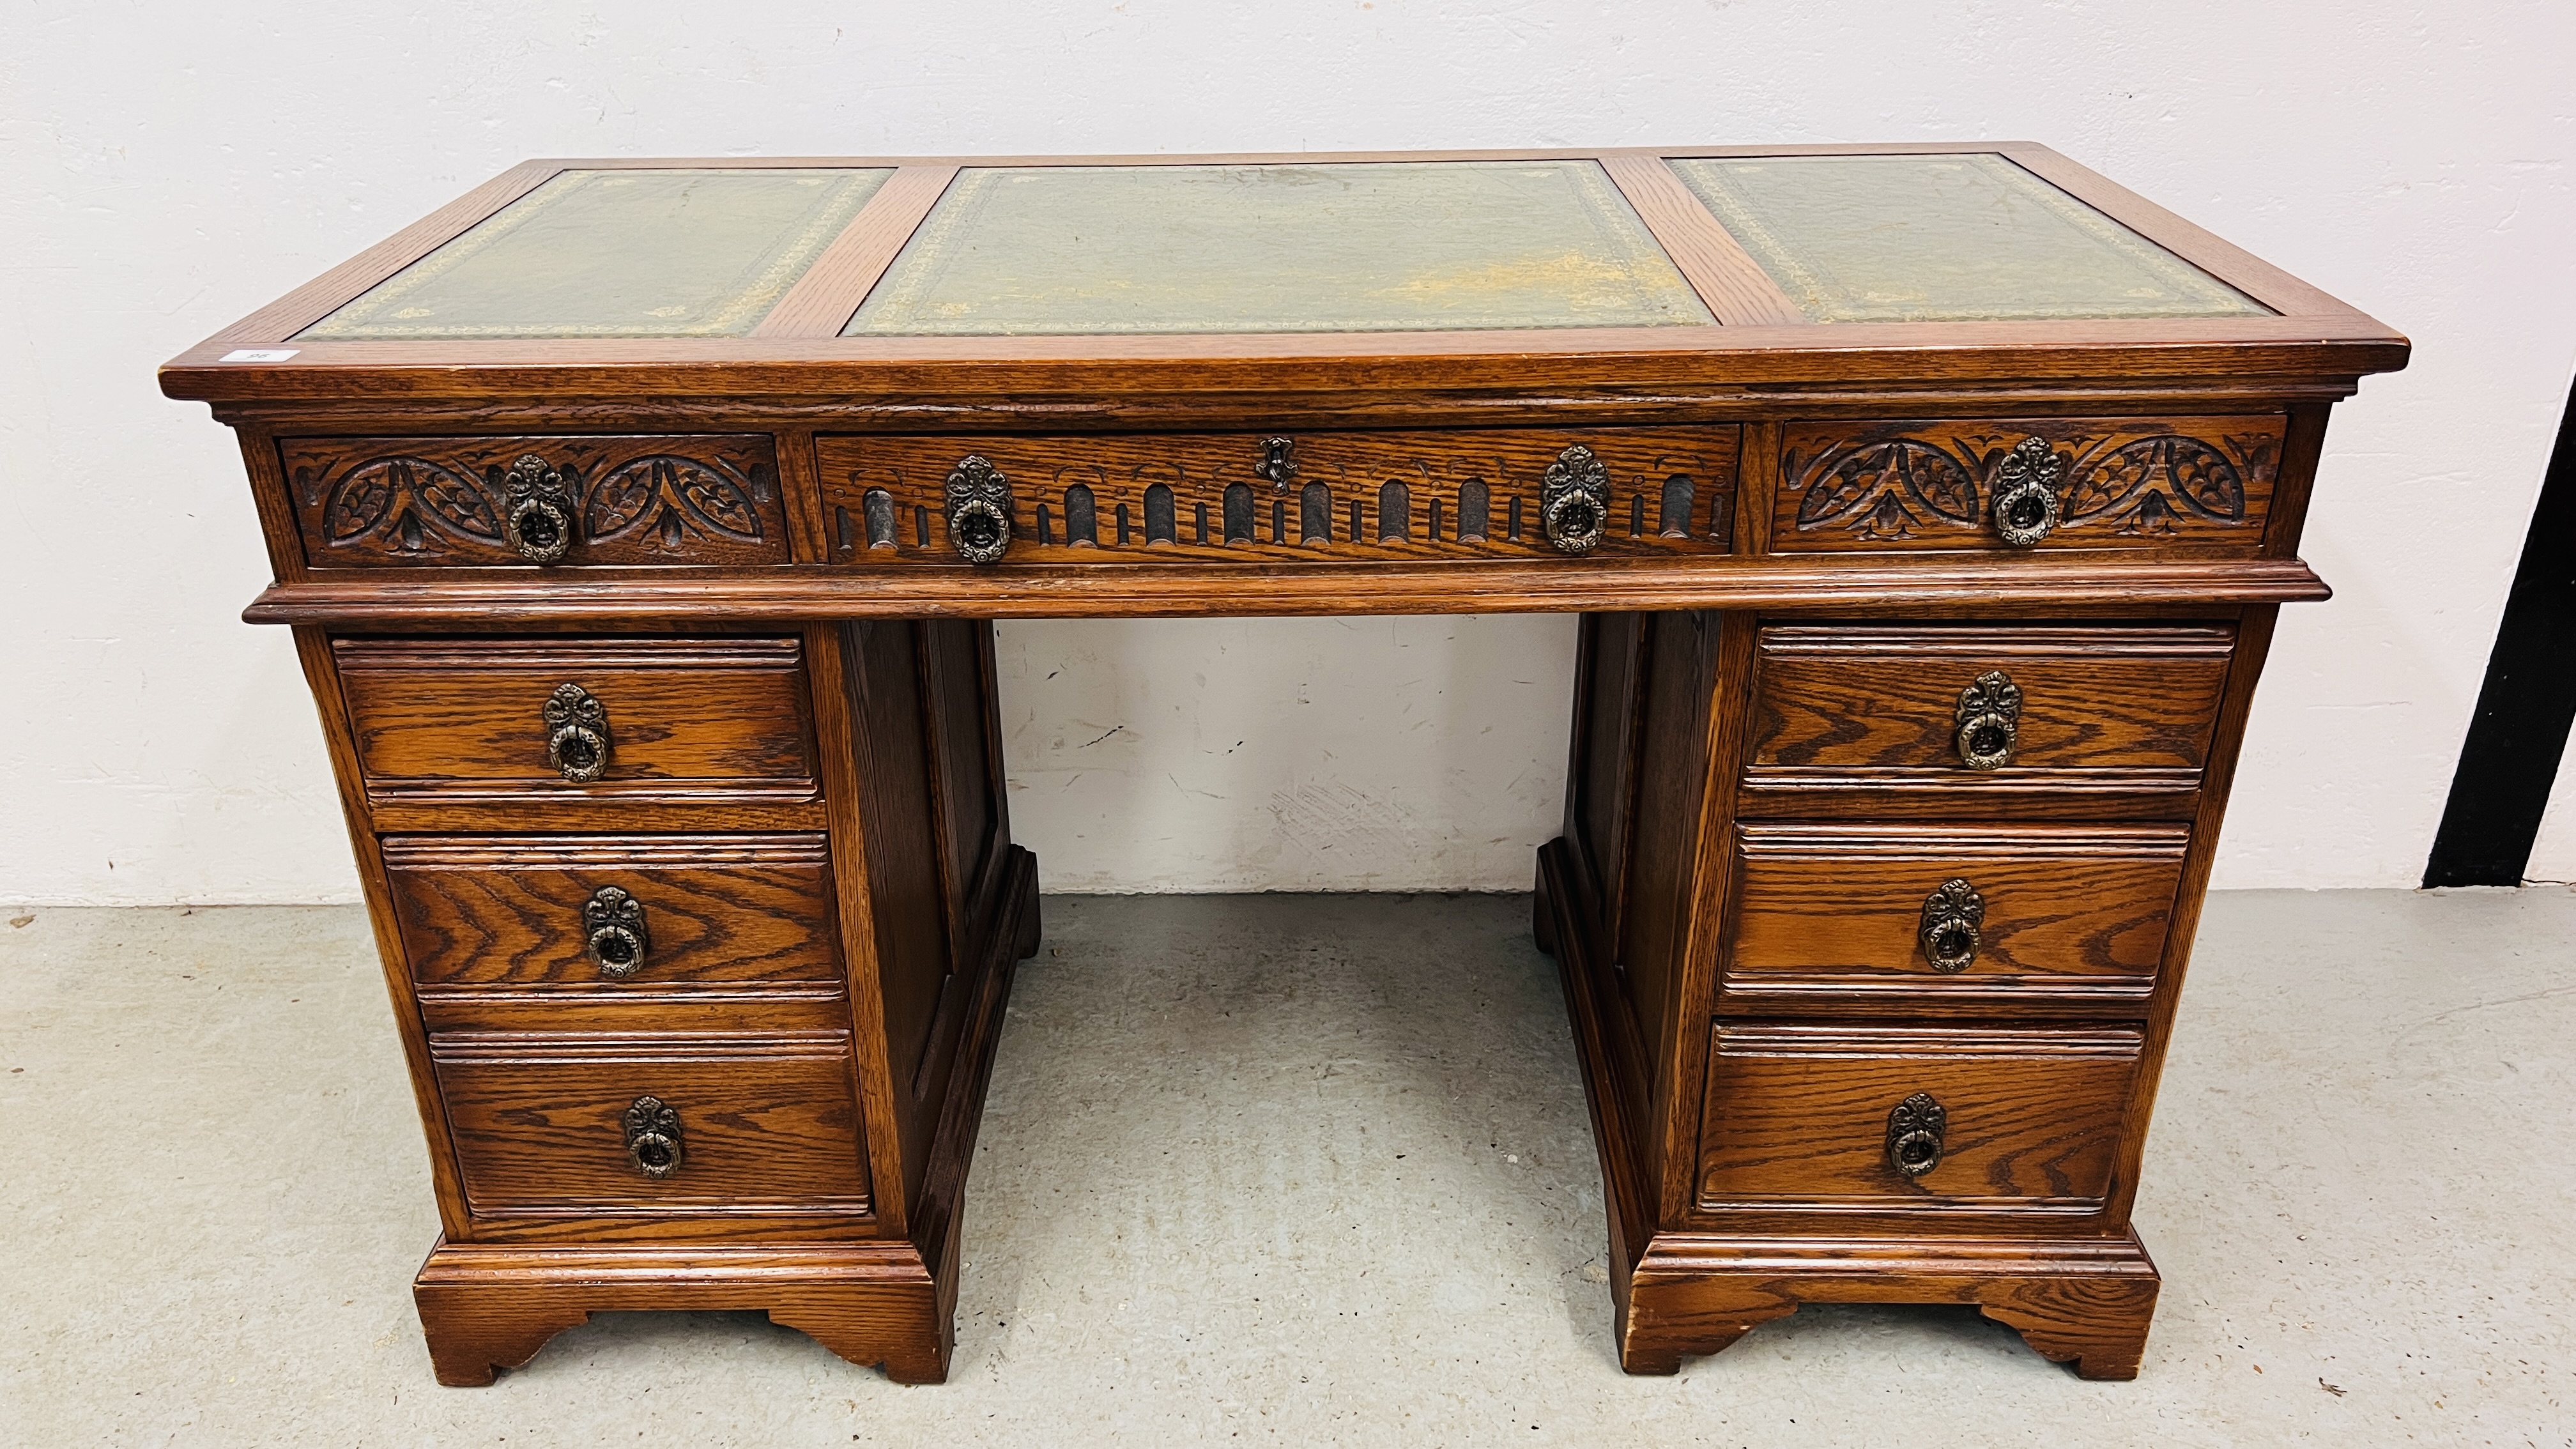 OLD CHARM TWIN PEDESTAL HOME OFFICE DESK WITH TOOLED LEATHER TOP - W 128CM. D 61CM.